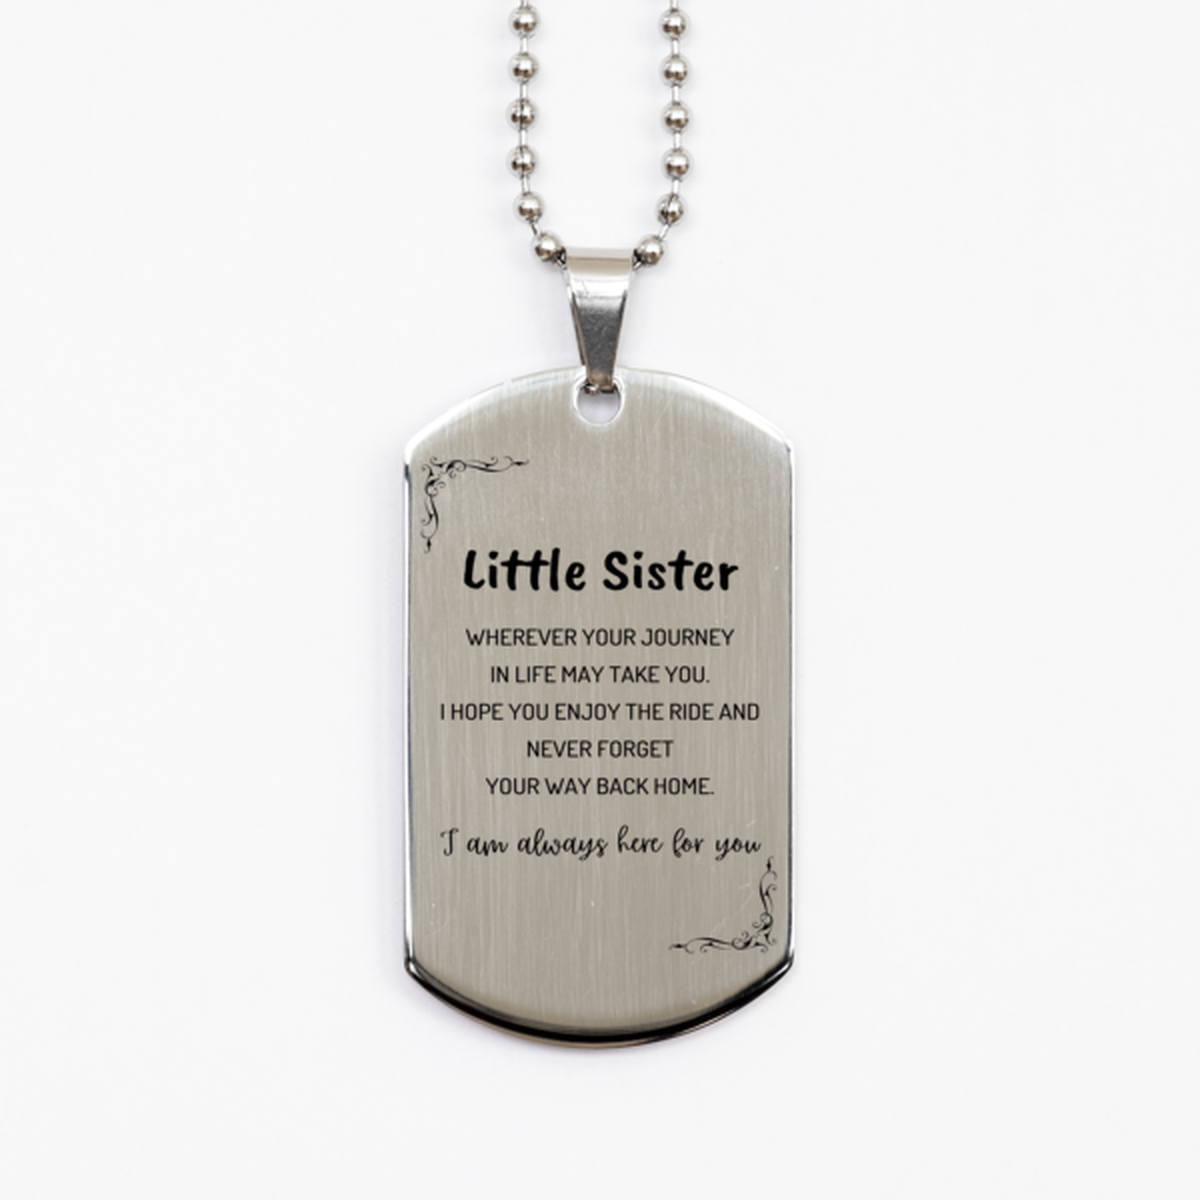 Little Sister wherever your journey in life may take you, I am always here for you Little Sister Silver Dog Tag, Awesome Christmas Gifts For Little Sister, Little Sister Birthday Gifts for Men Women Family Loved One